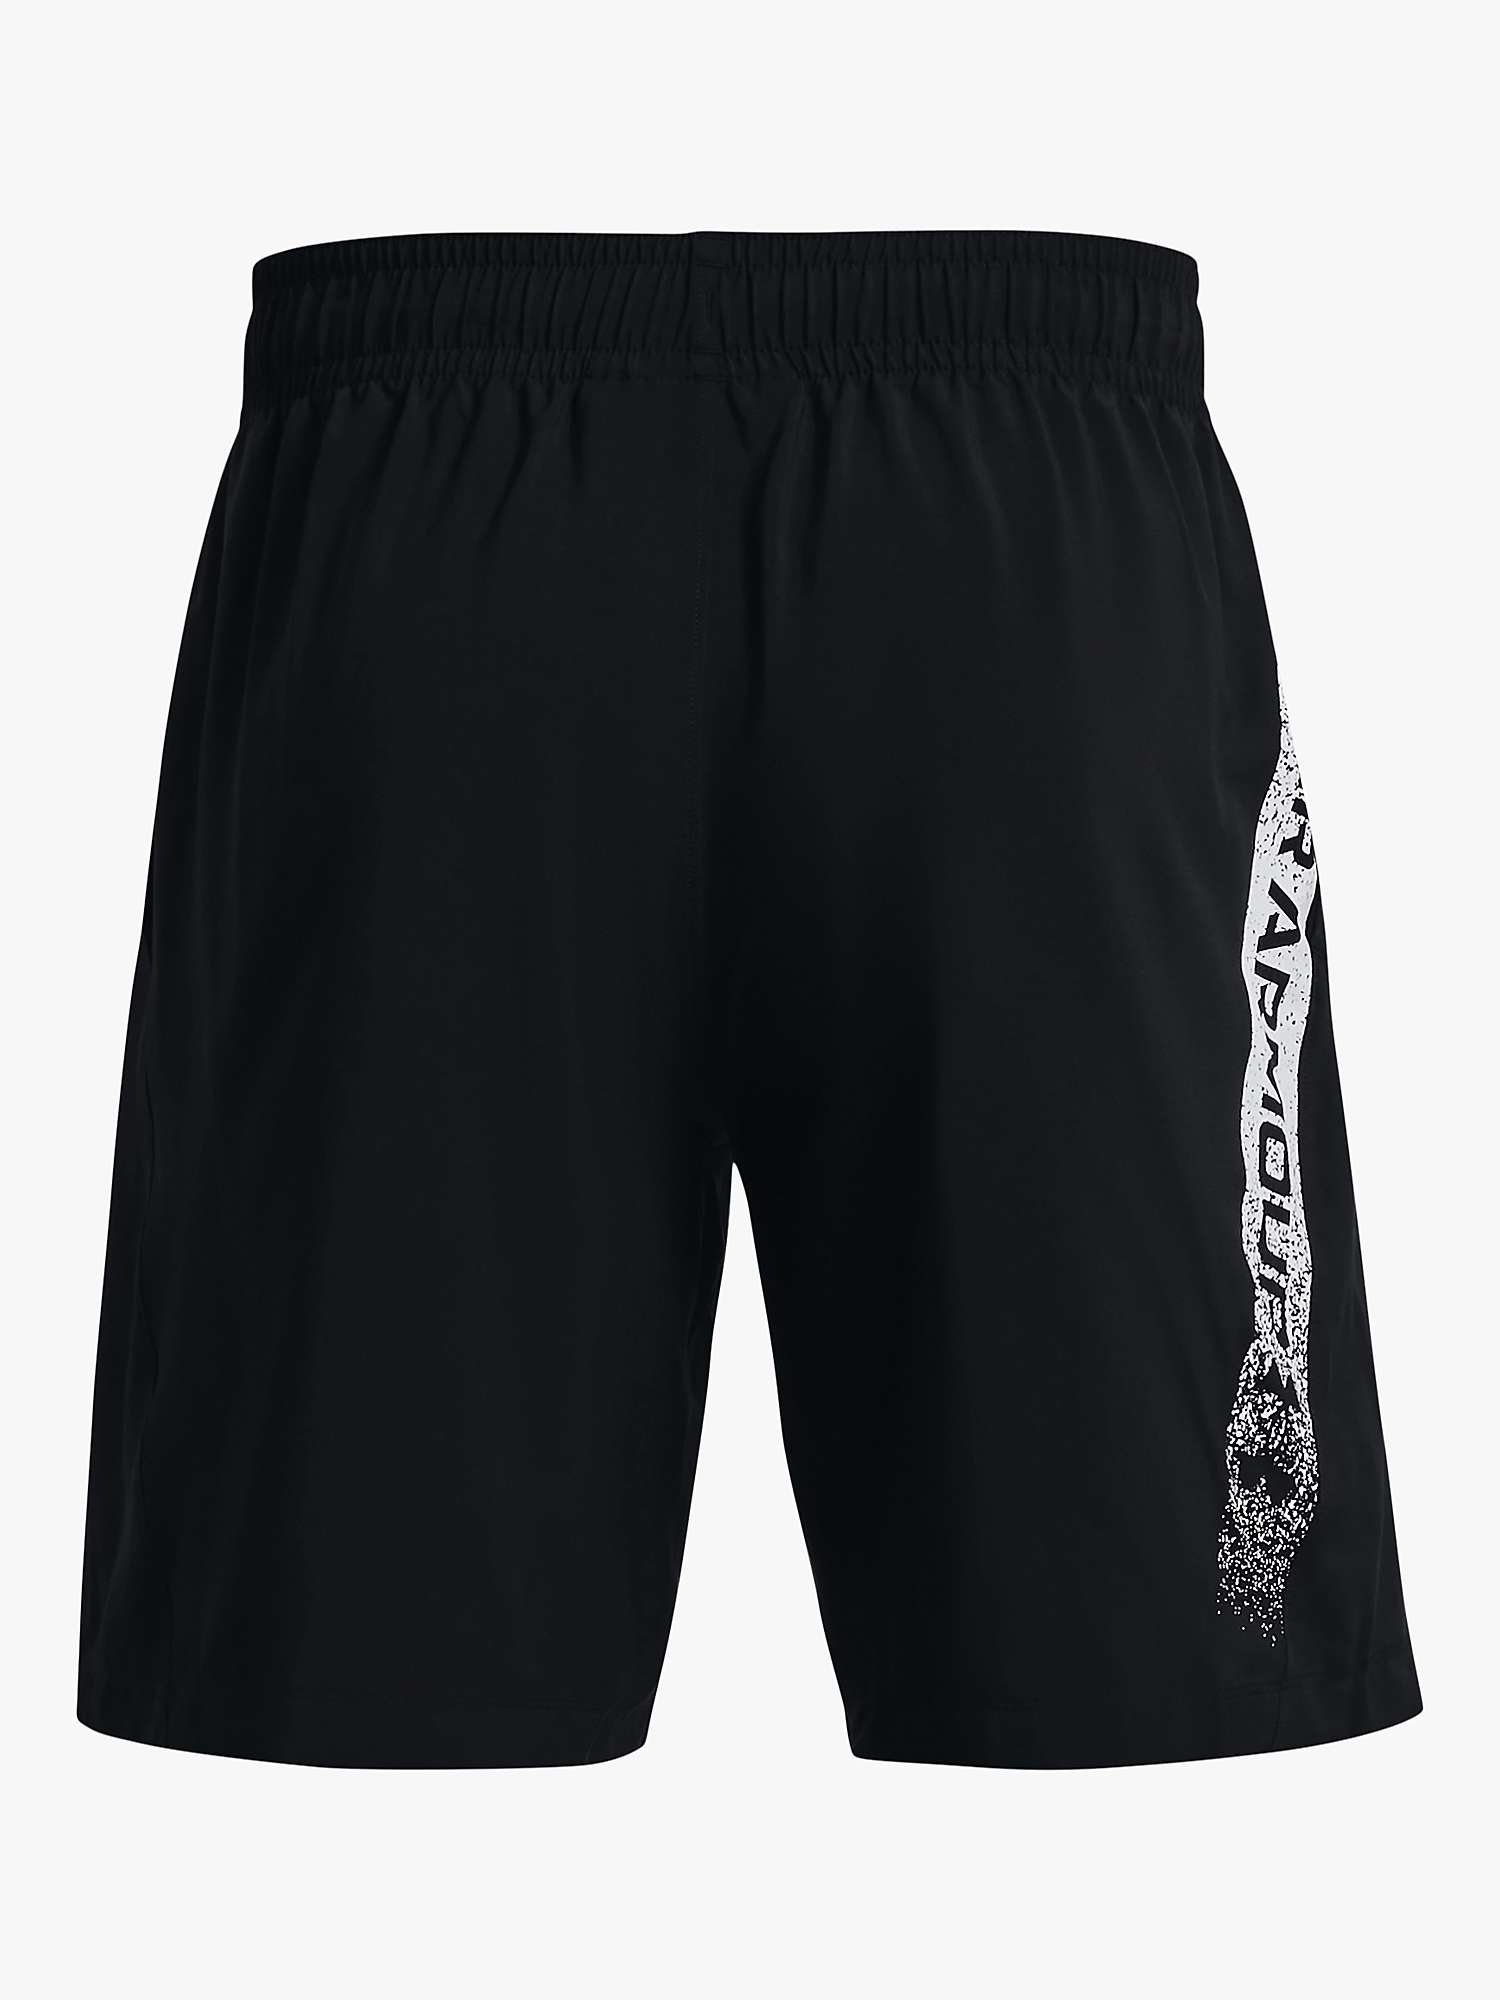 Under Armour Woven Graphic Gym Shorts, Black/White at John Lewis & Partners